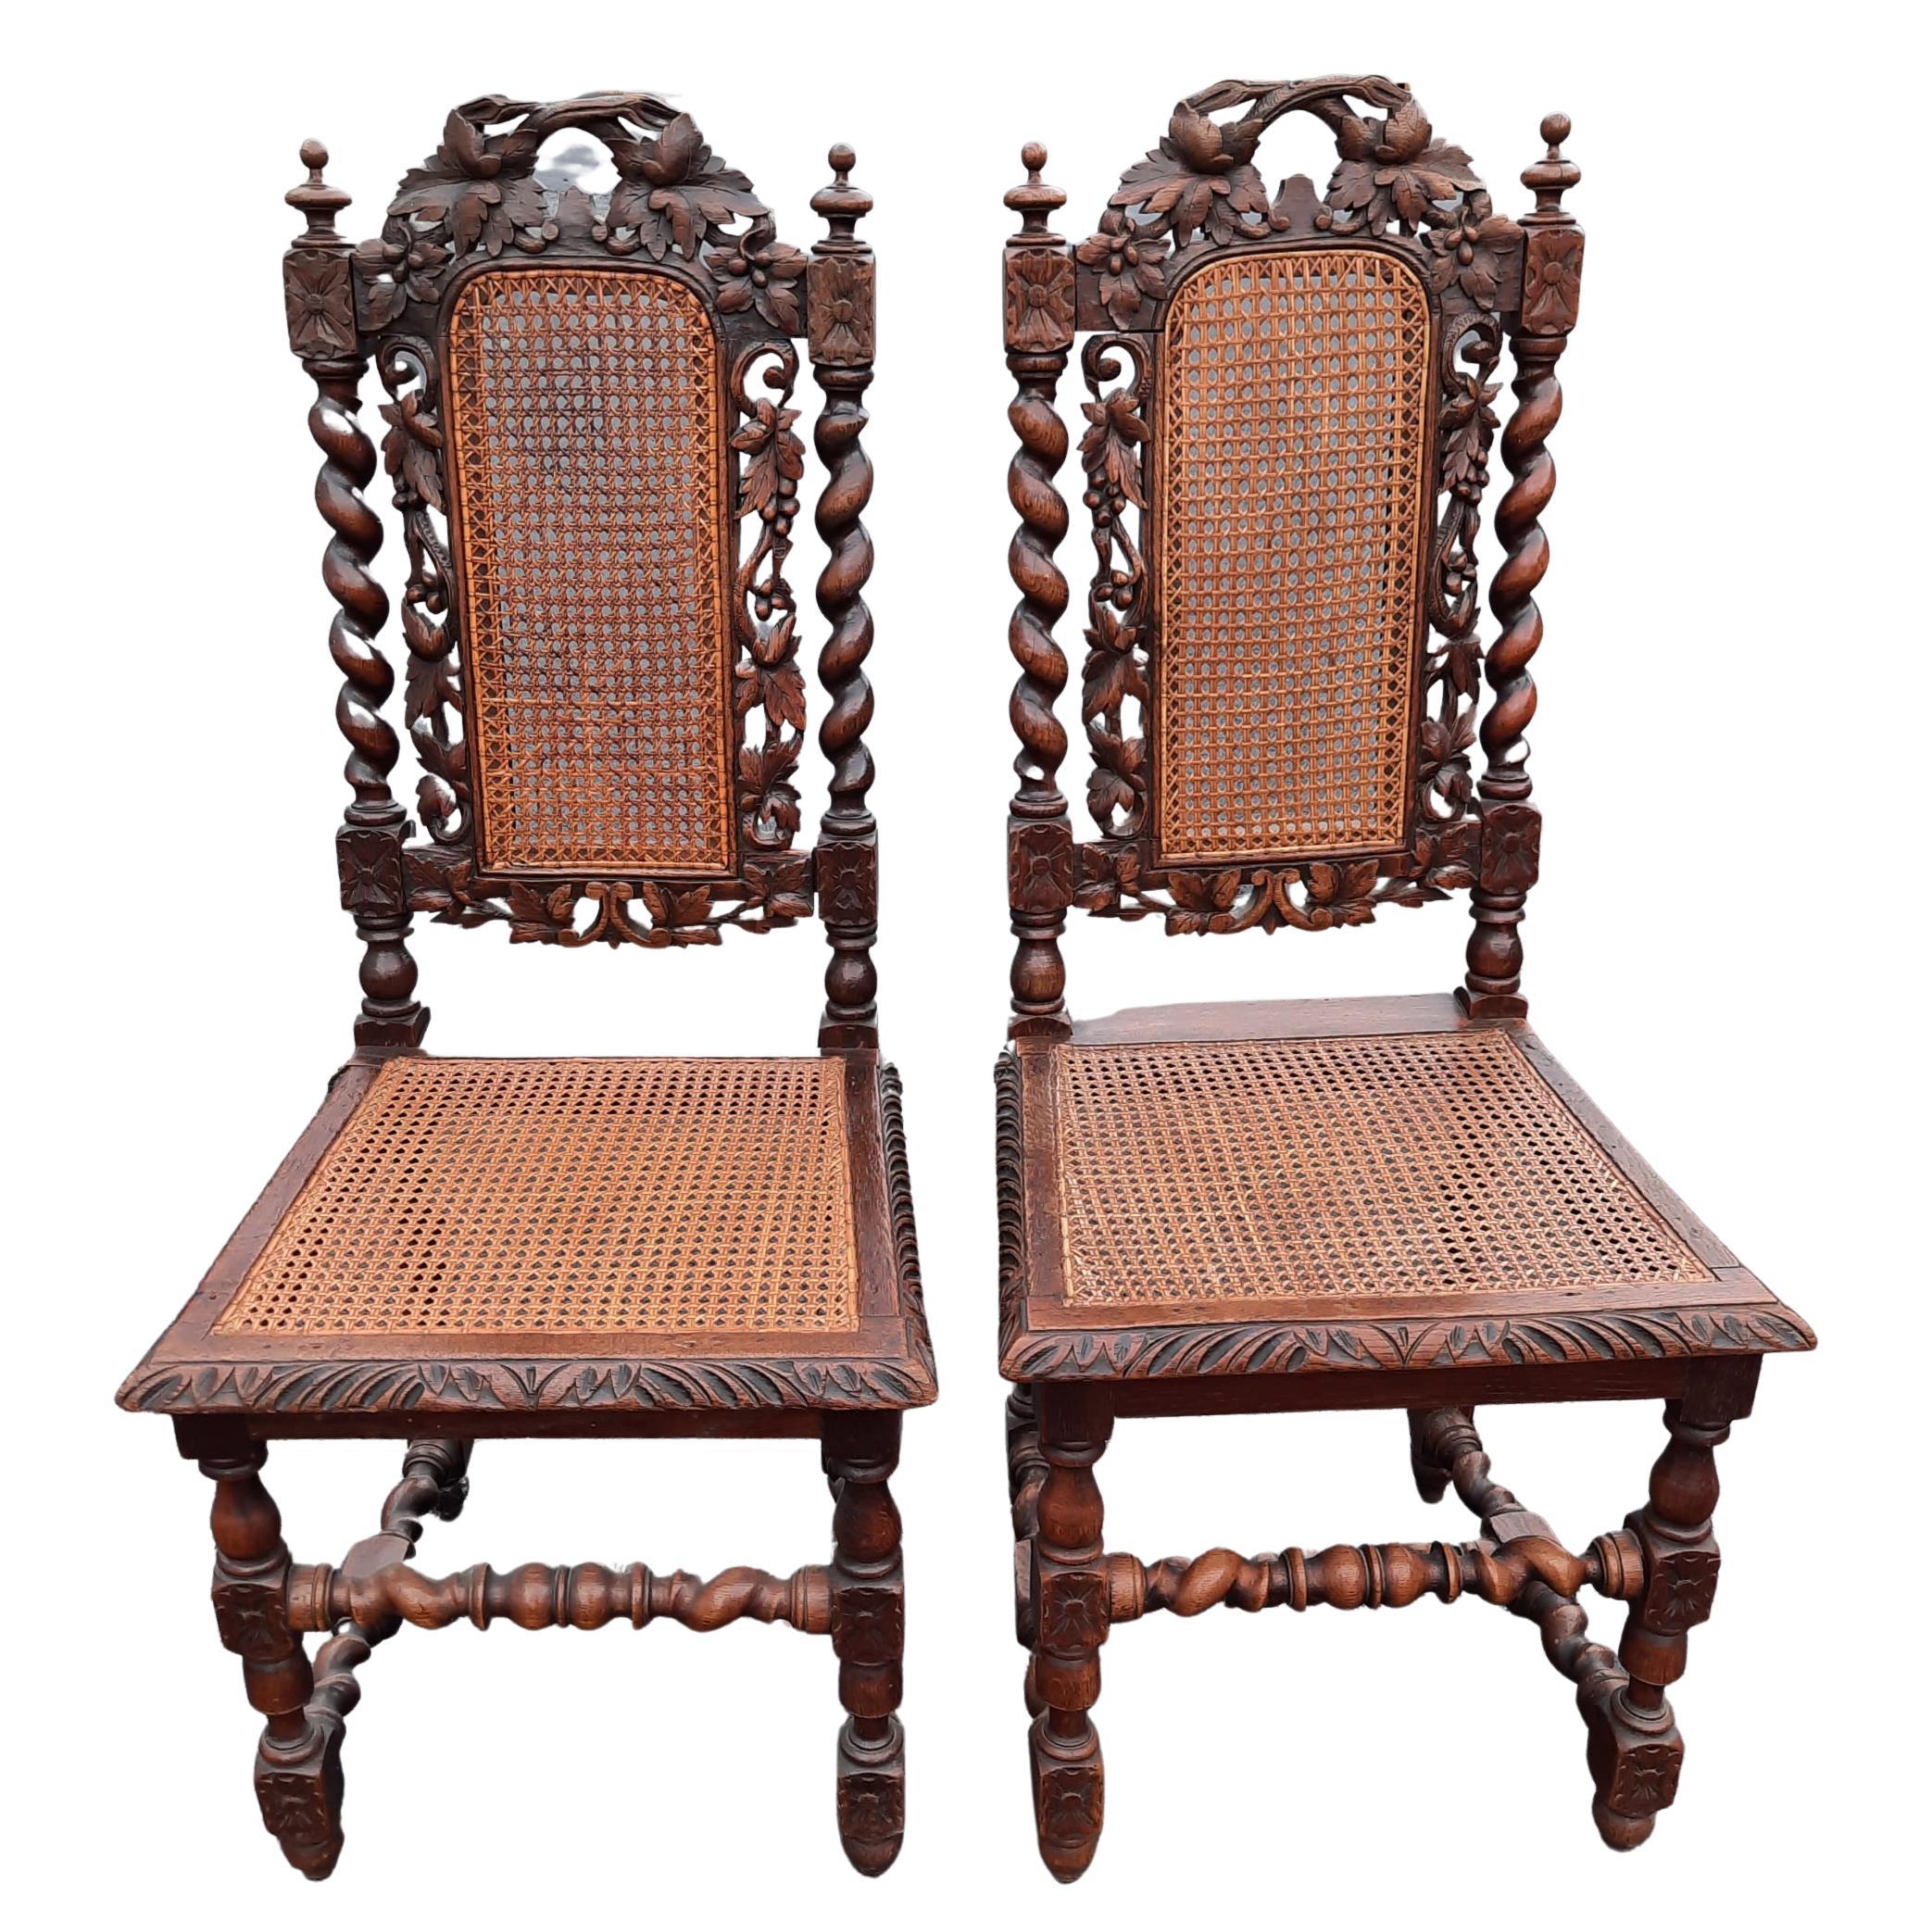 A very decorative set of 4 of antique Jacobean chairs in oak with custom loose cushions They have elaborately carved backs with carved and pierced central panels and a carved back rail depicting vine leaves. The side supports are barley twist and